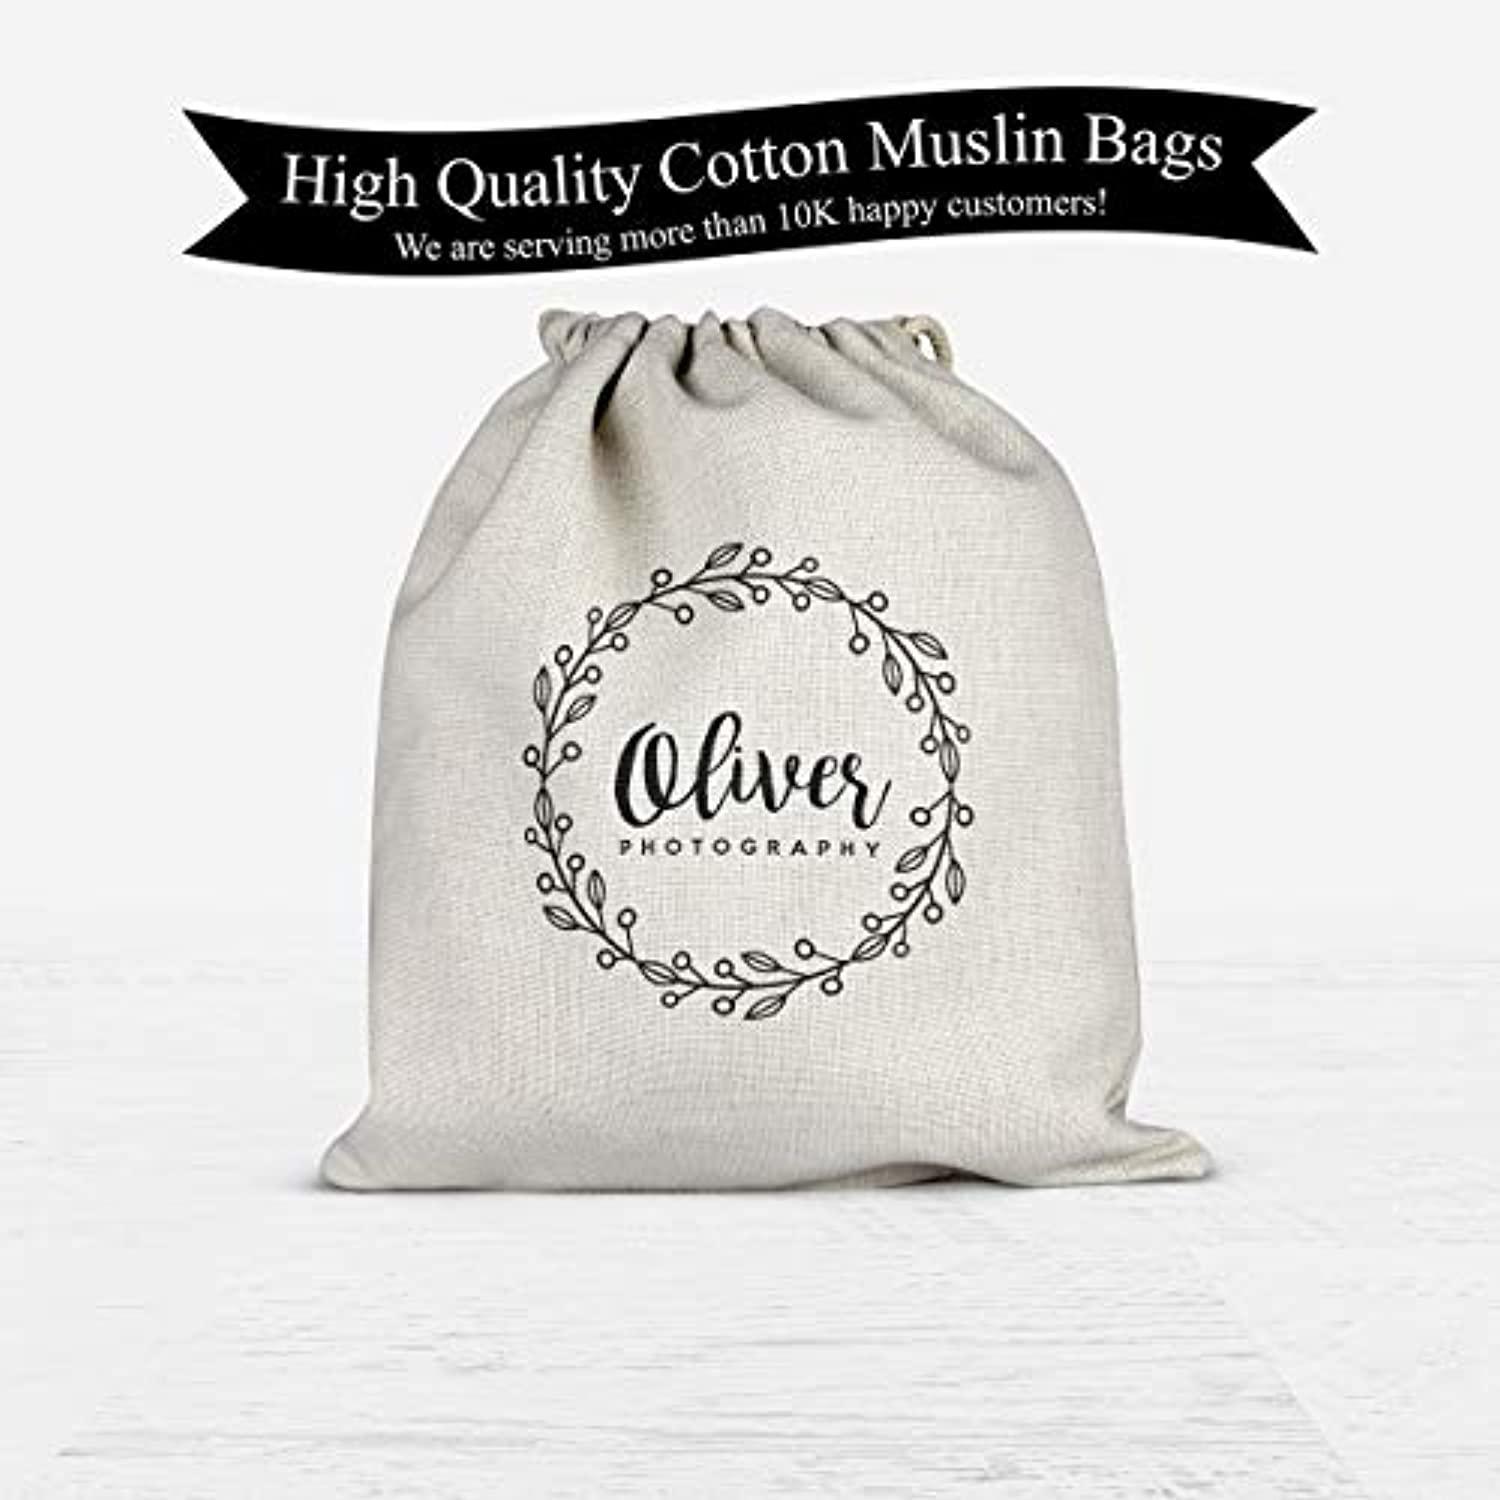 Custom Branded Bags, Personalized Totes and Bags